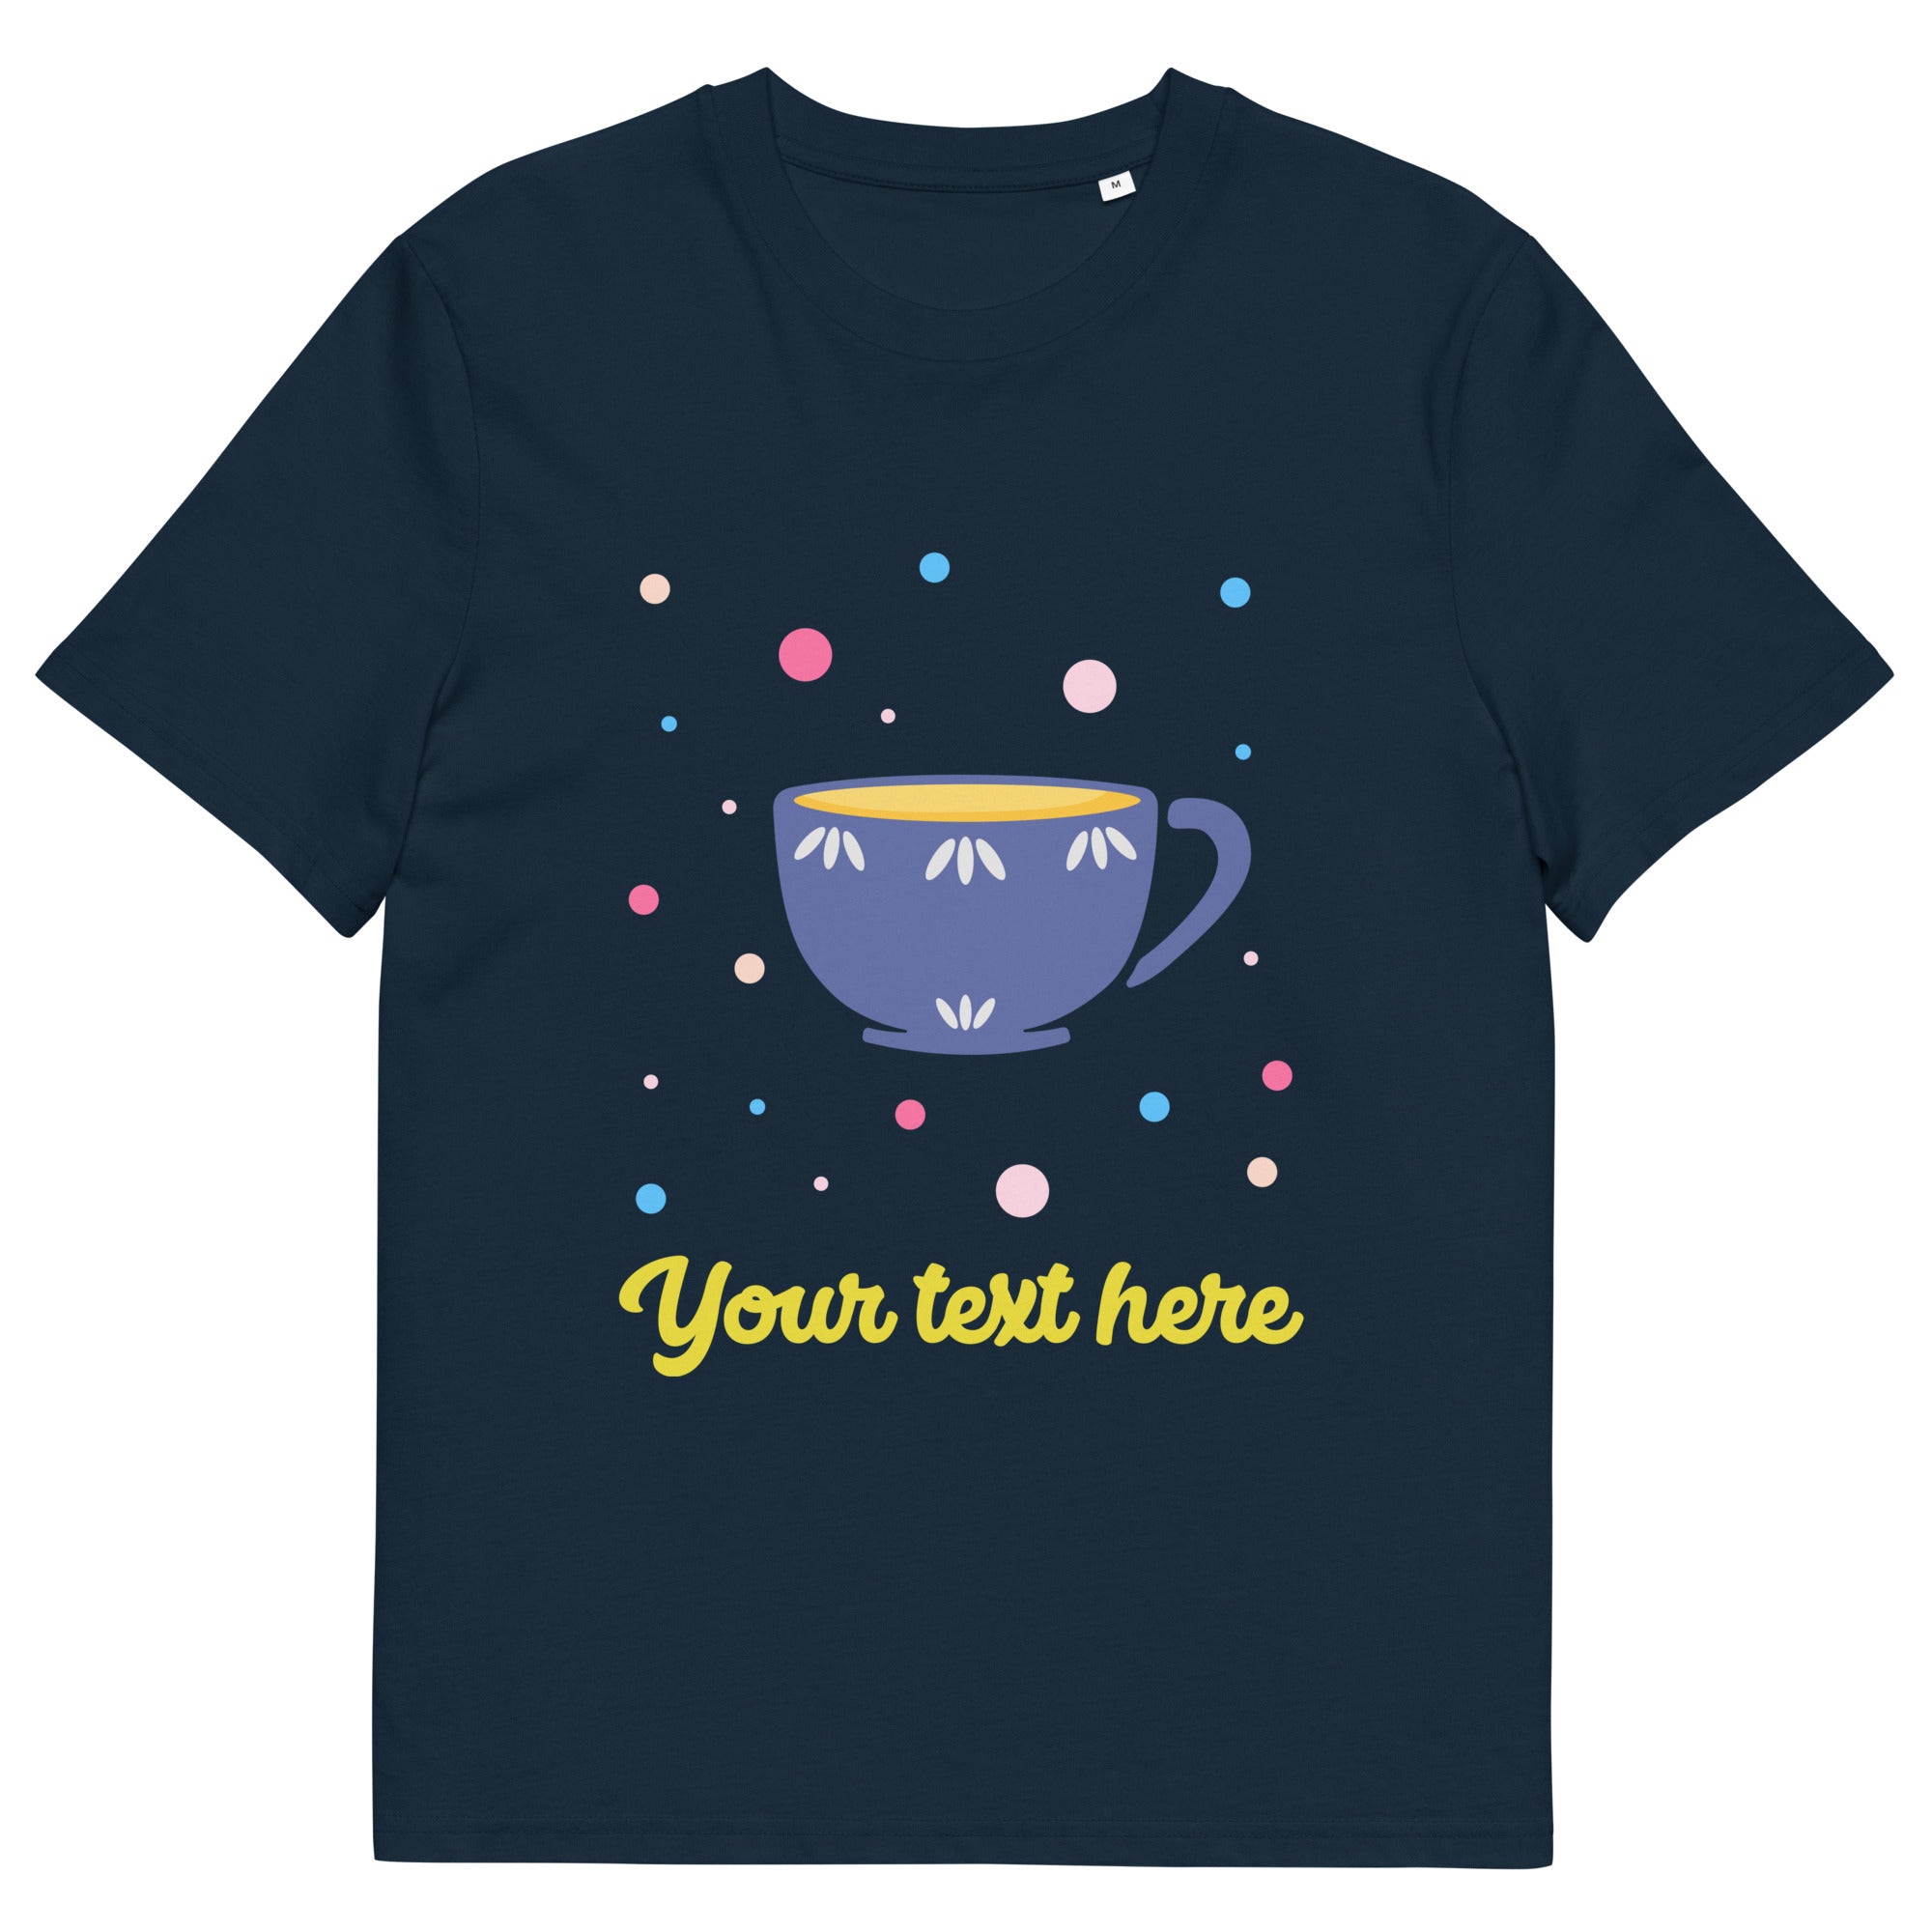 Personalised Custom Text - Organic Cotton Adults Unisex T-Shirt - London Doodles - Cup Of Tea - Navy